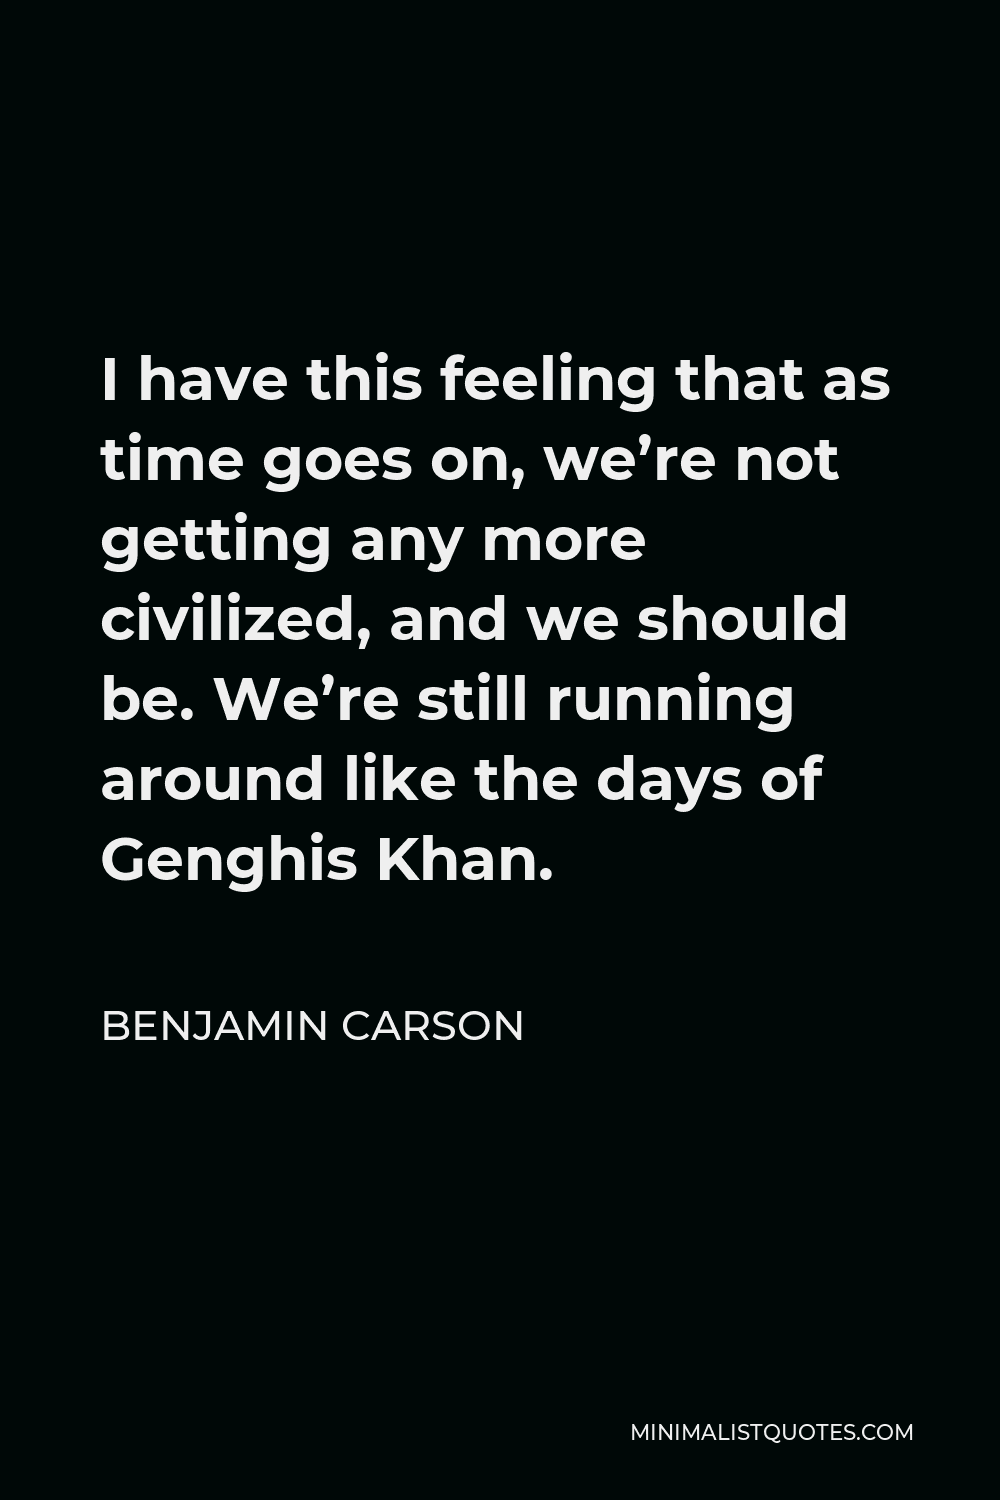 Benjamin Carson Quote - I have this feeling that as time goes on, we’re not getting any more civilized, and we should be. We’re still running around like the days of Genghis Khan.